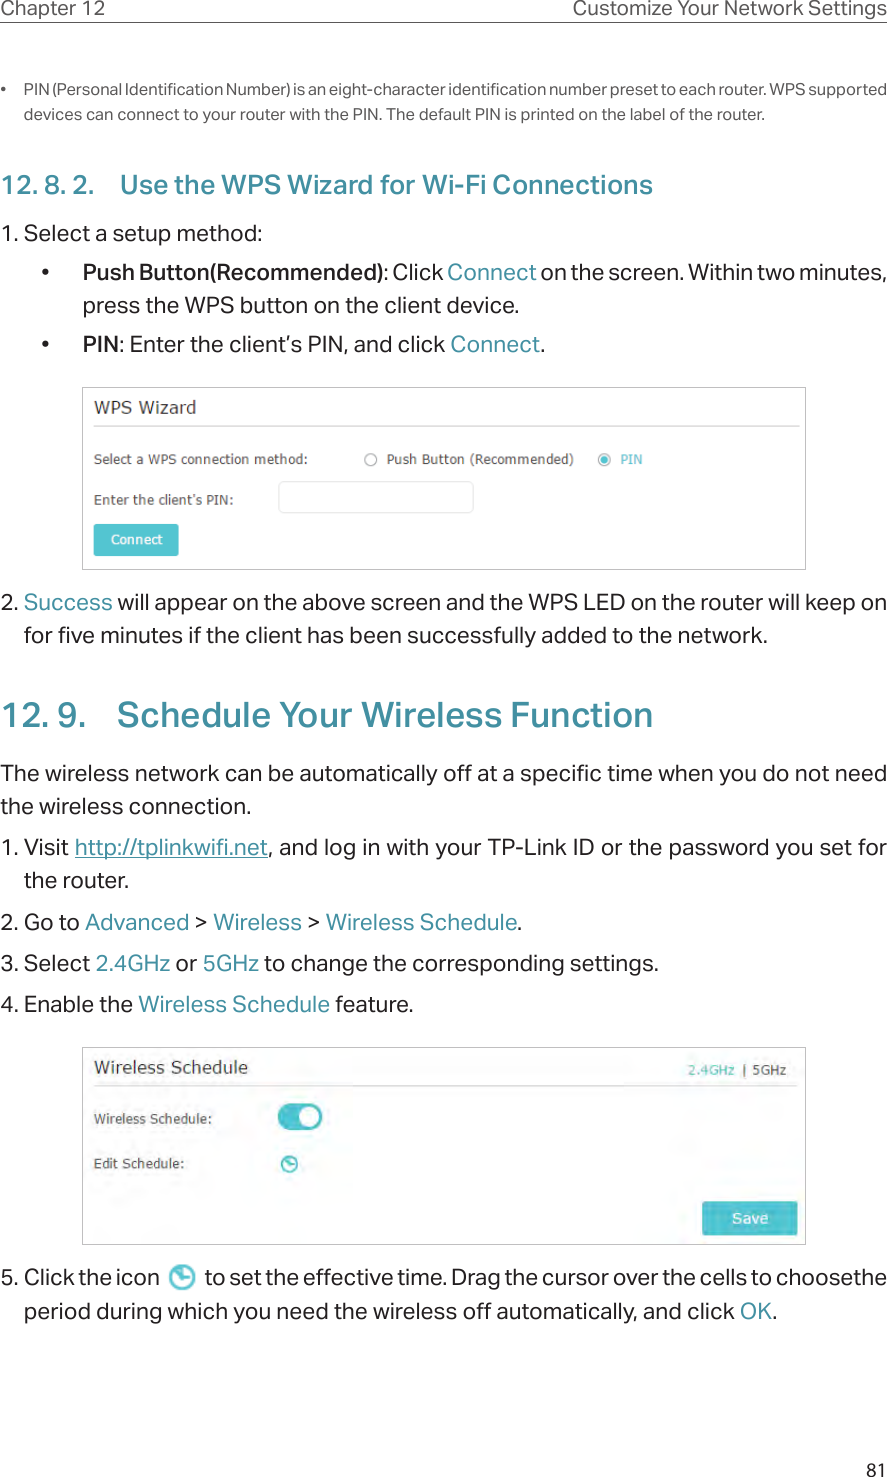 81Chapter 12 Customize Your Network Settings•  PIN (Personal Identification Number) is an eight-character identification number preset to each router. WPS supported devices can connect to your router with the PIN. The default PIN is printed on the label of the router.12. 8. 2.  Use the WPS Wizard for Wi-Fi Connections1. Select a setup method: •  Push Button(Recommended): Click Connect on the screen. Within two minutes, press the WPS button on the client device.•  PIN: Enter the client’s PIN, and click Connect.2. Success will appear on the above screen and the WPS LED on the router will keep on for five minutes if the client has been successfully added to the network.12. 9.  Schedule Your Wireless FunctionThe wireless network can be automatically off at a specific time when you do not need the wireless connection.1. Visit http://tplinkwifi.net, and log in with your TP-Link ID or the password you set for the router.2. Go to Advanced &gt; Wireless &gt; Wireless Schedule.3. Select 2.4GHz or 5GHz to change the corresponding settings.4. Enable the Wireless Schedule feature.5. Click the icon   to set the effective time. Drag the cursor over the cells to choosethe period during which you need the wireless off automatically, and click OK.